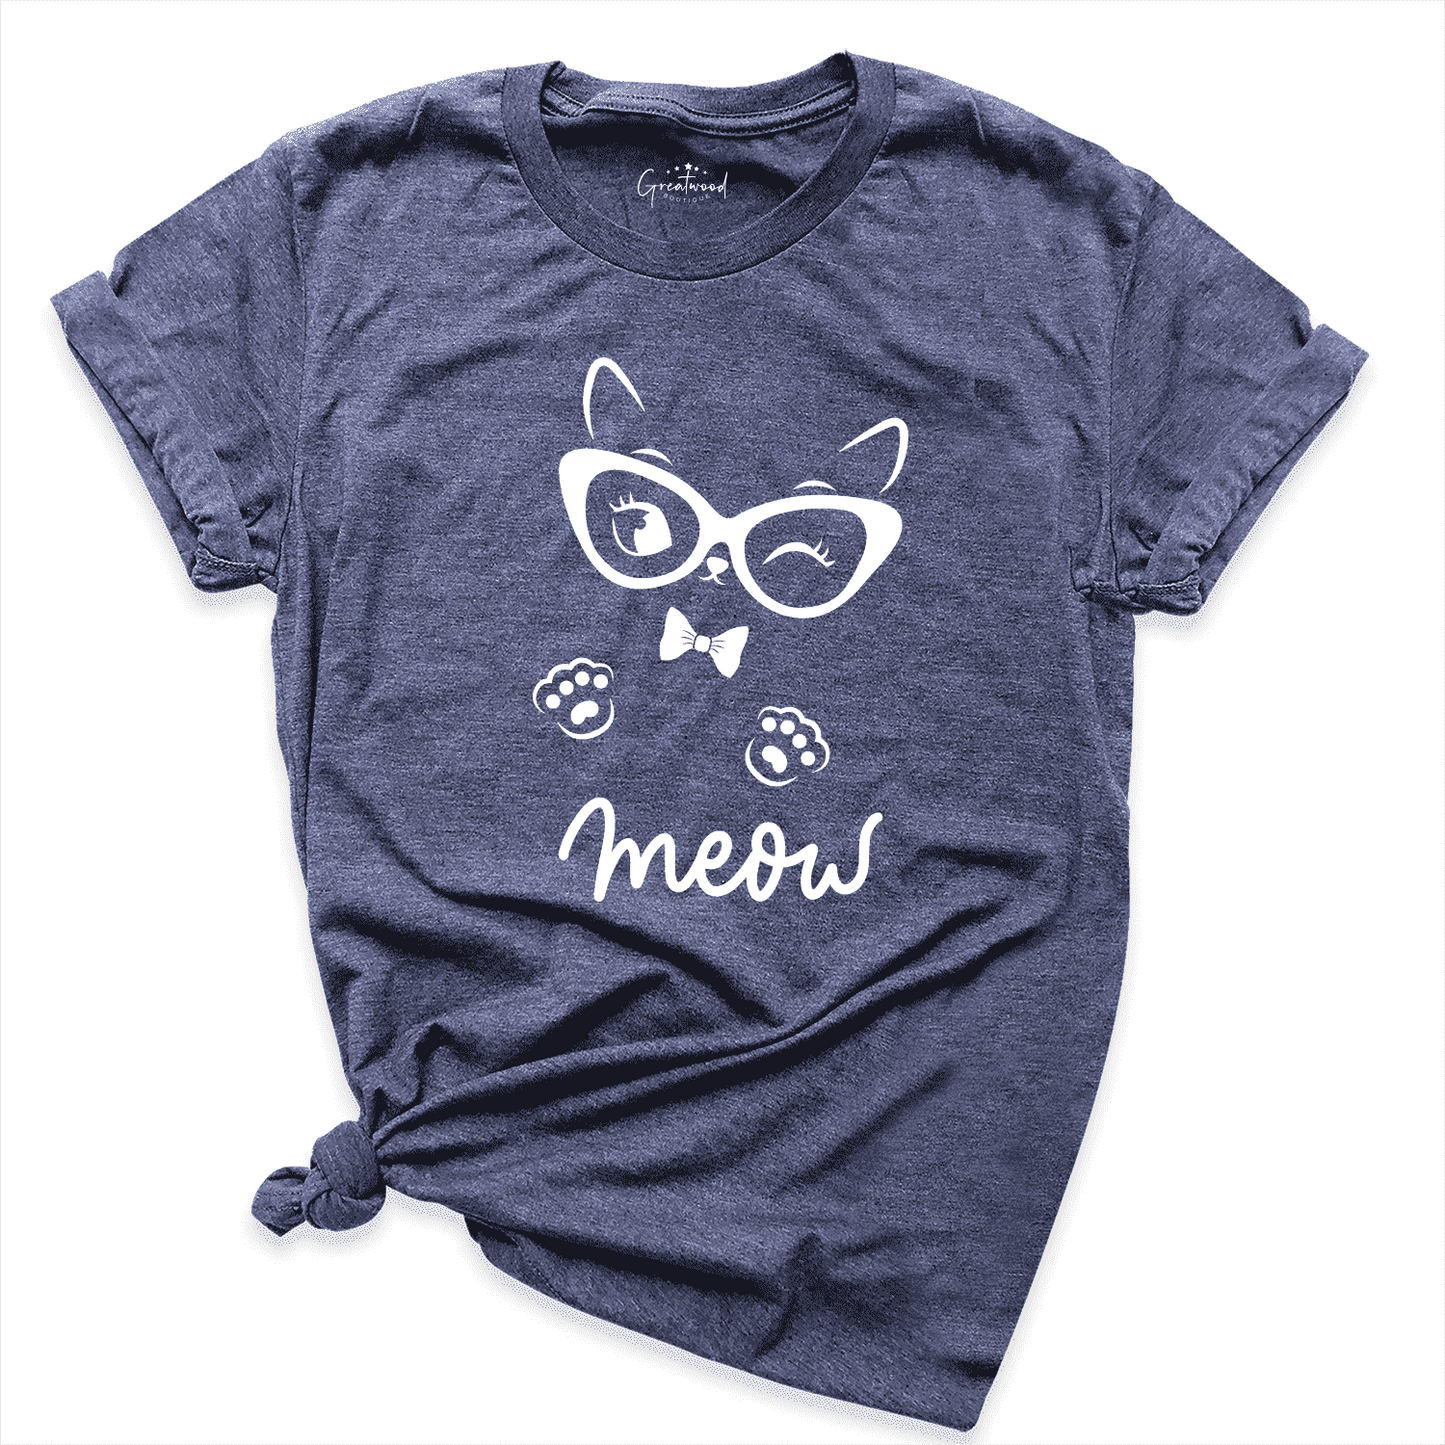 Meow Cat Shirt Navy - Greatwood Boutique